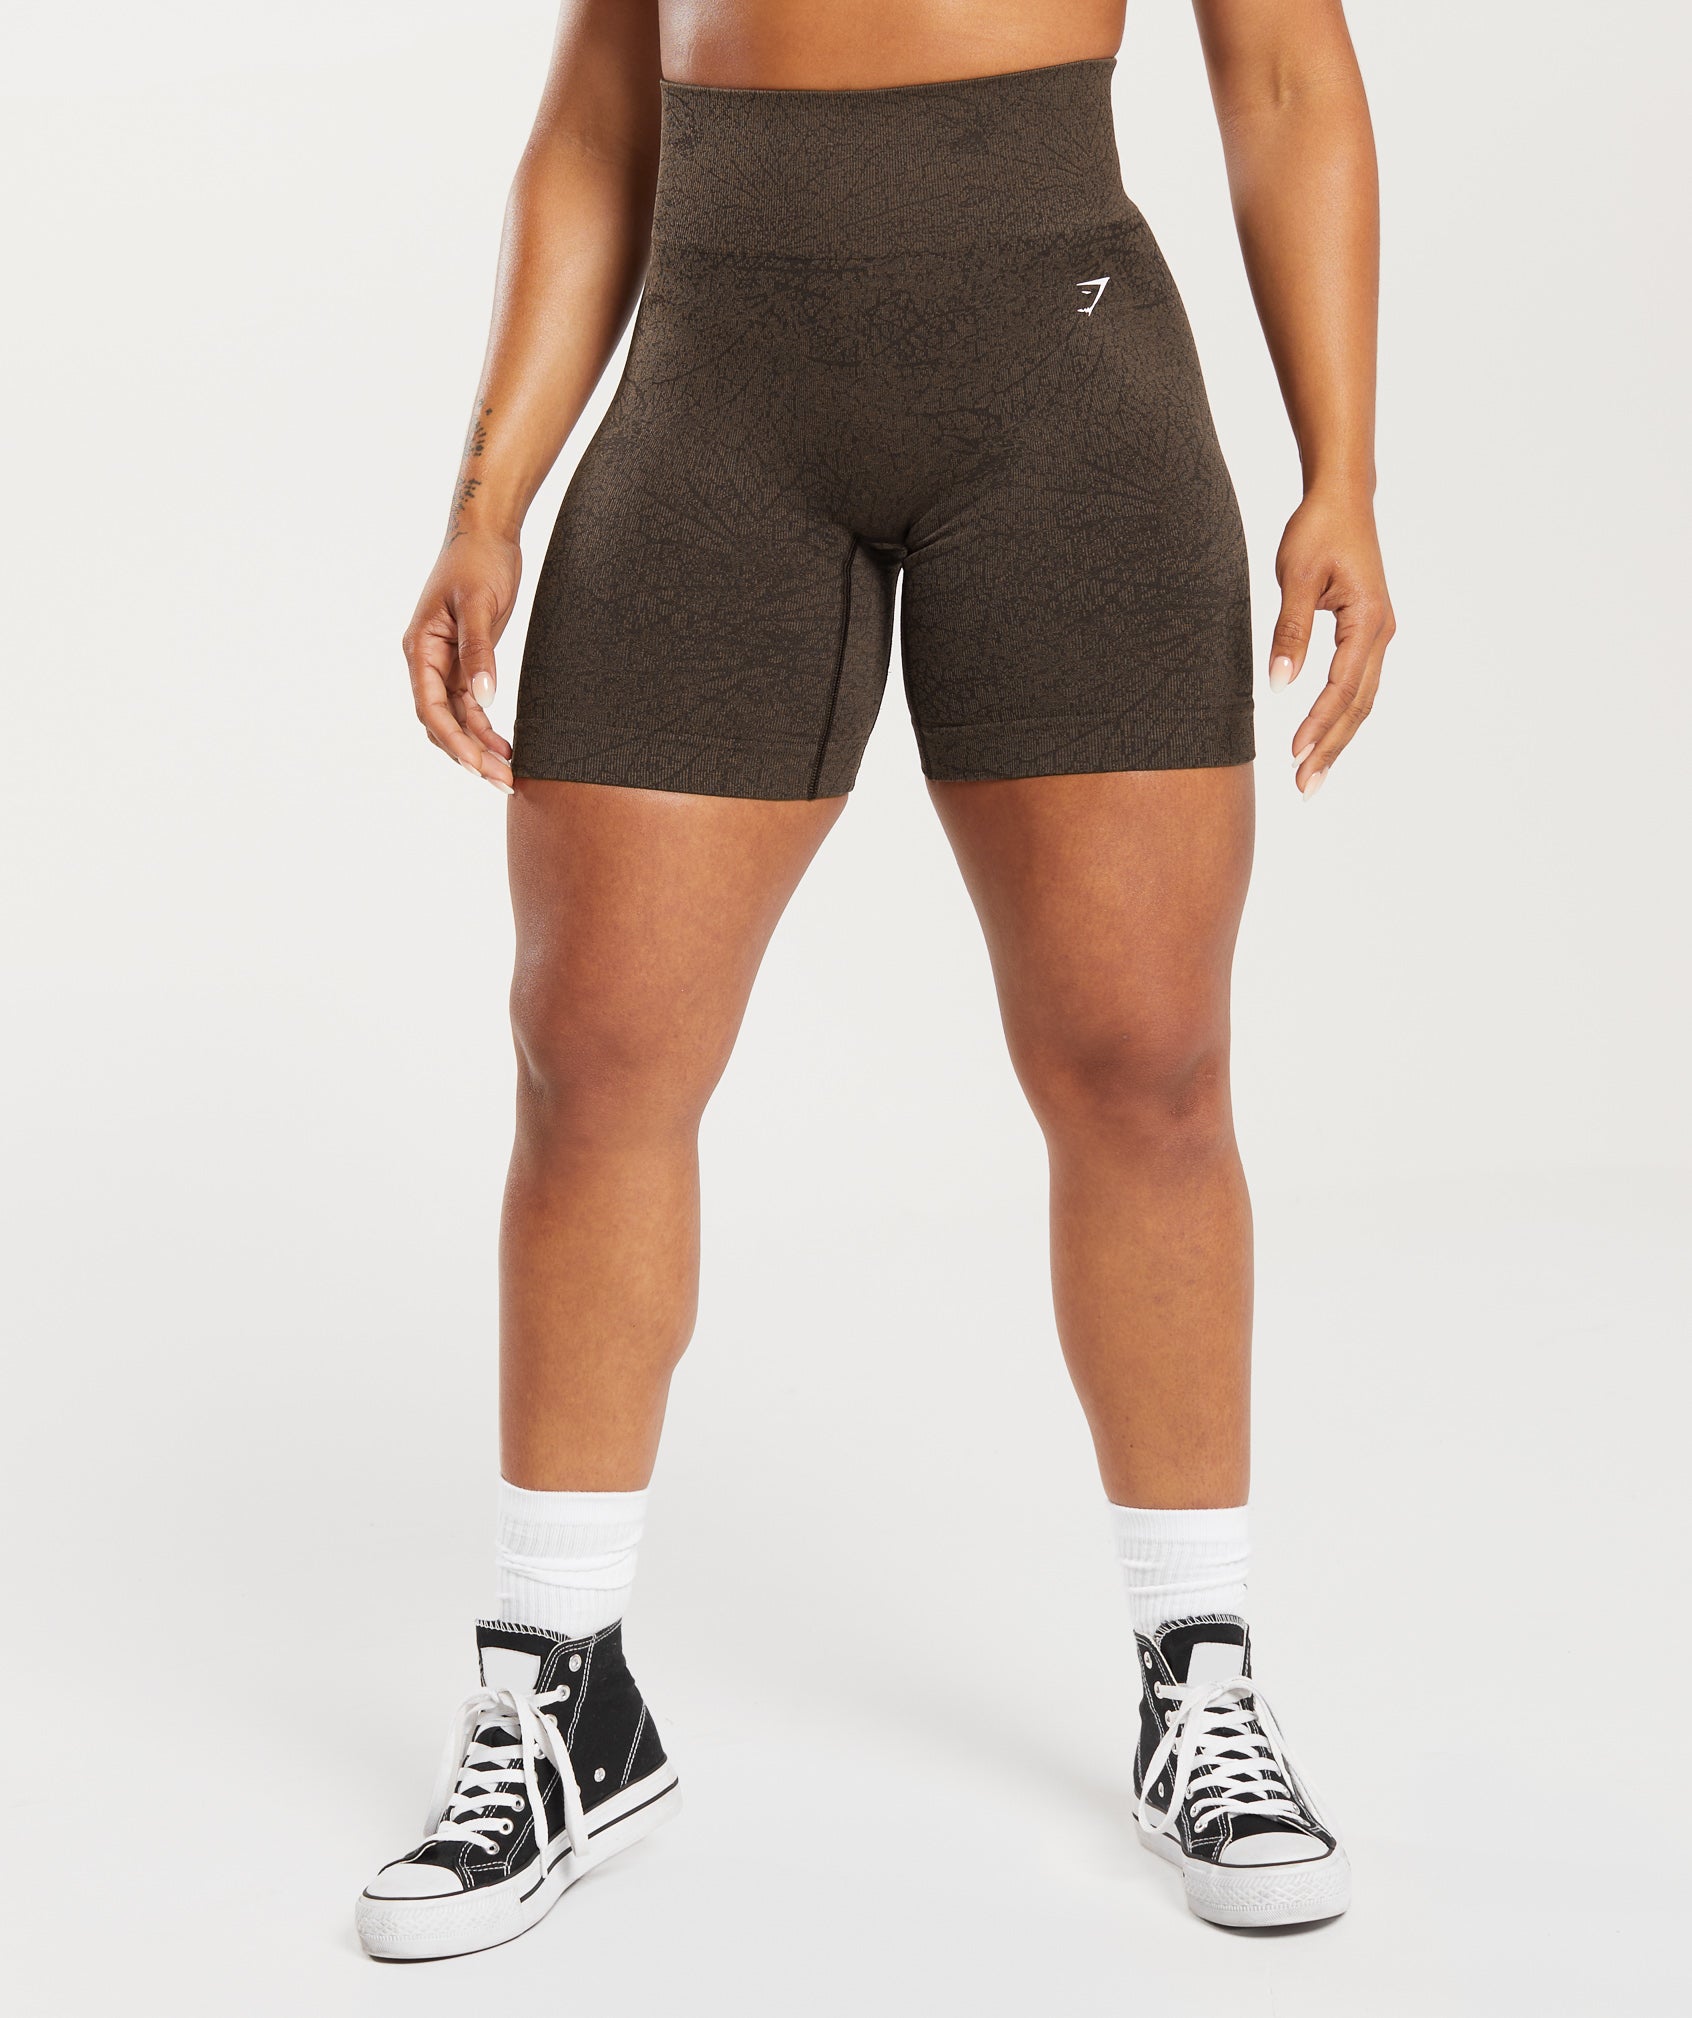 Adapt Pattern Seamless Shorts in Woodland Brown/Soul Brown - view 1